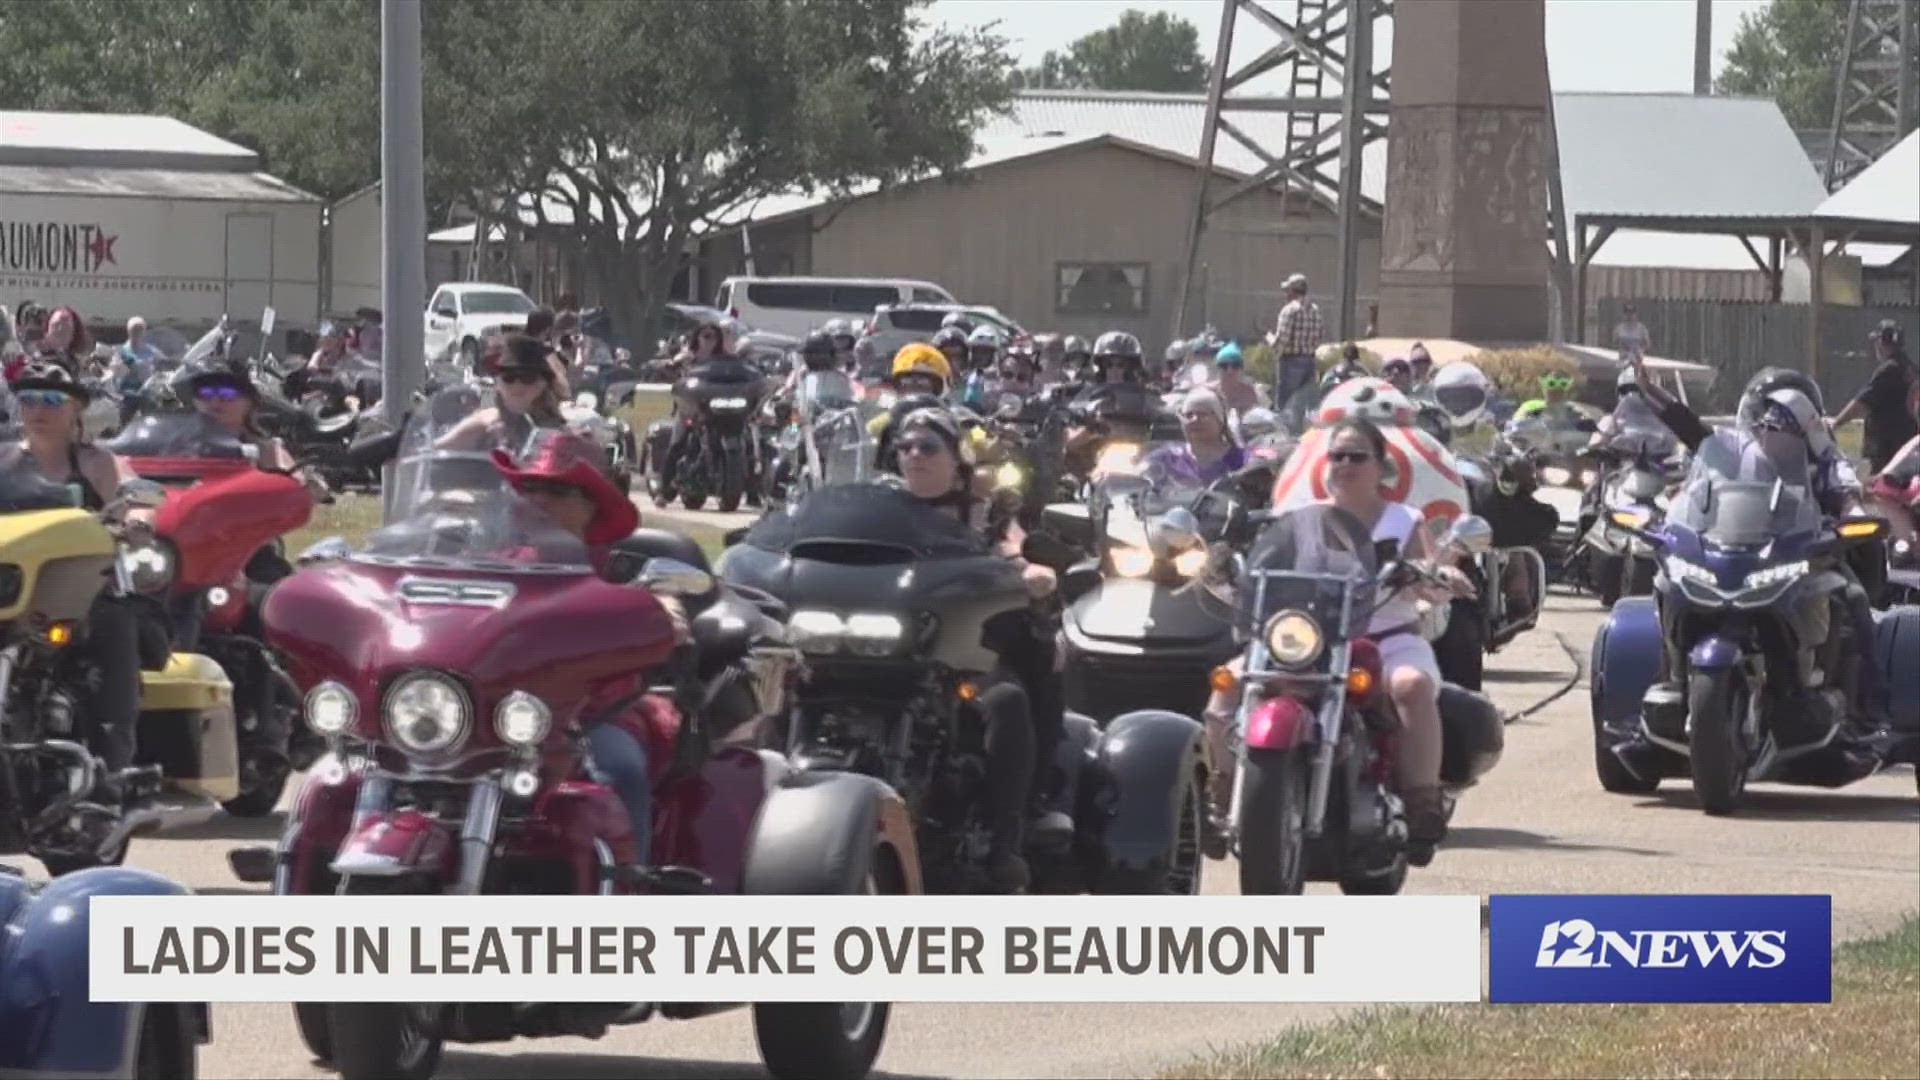 Women motorcyclists will gather to be part of the largest traveling all-female motorcycle parade in the United States.